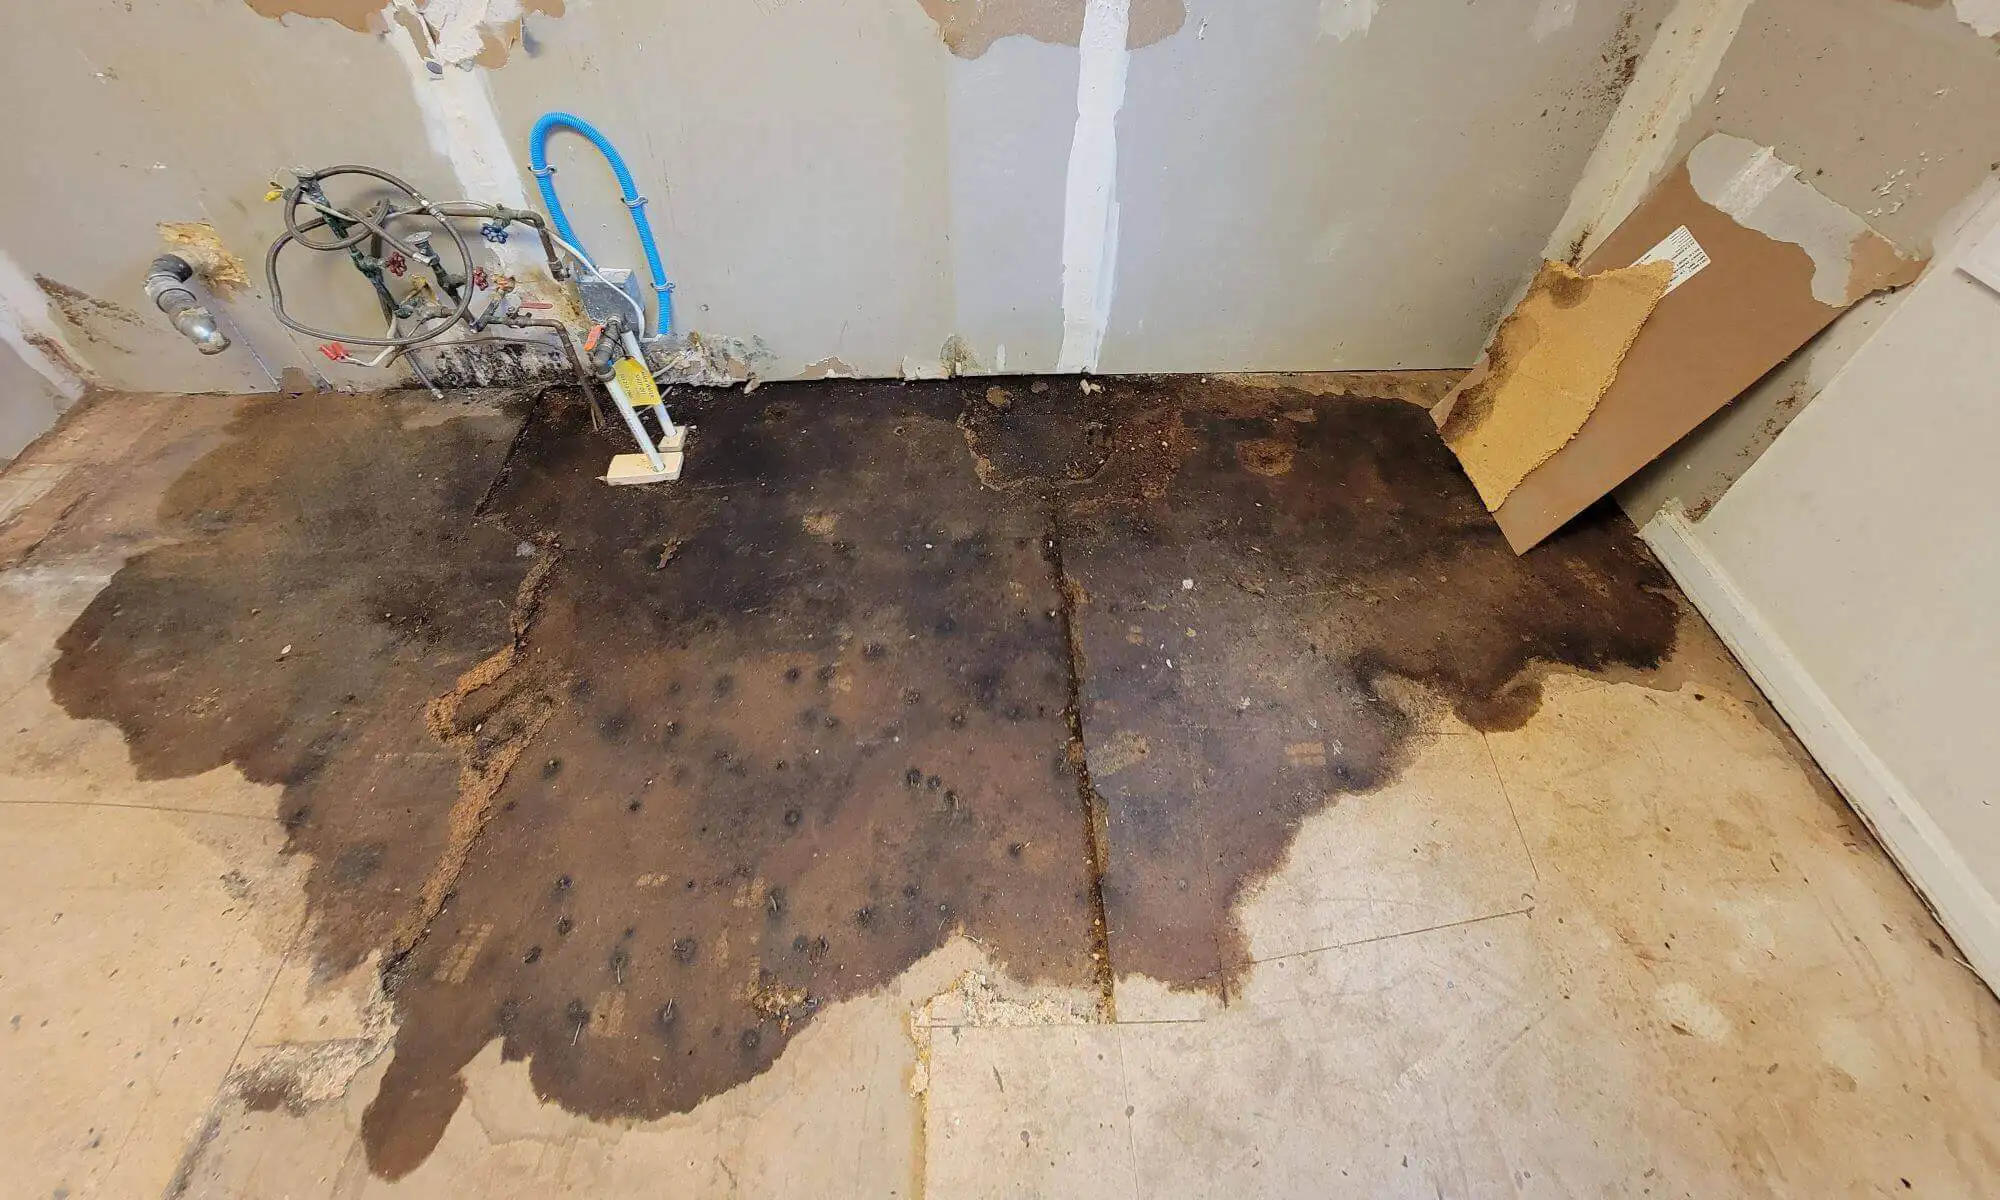 Water damage to the floor of a home caused by faulty plumbing under the house.